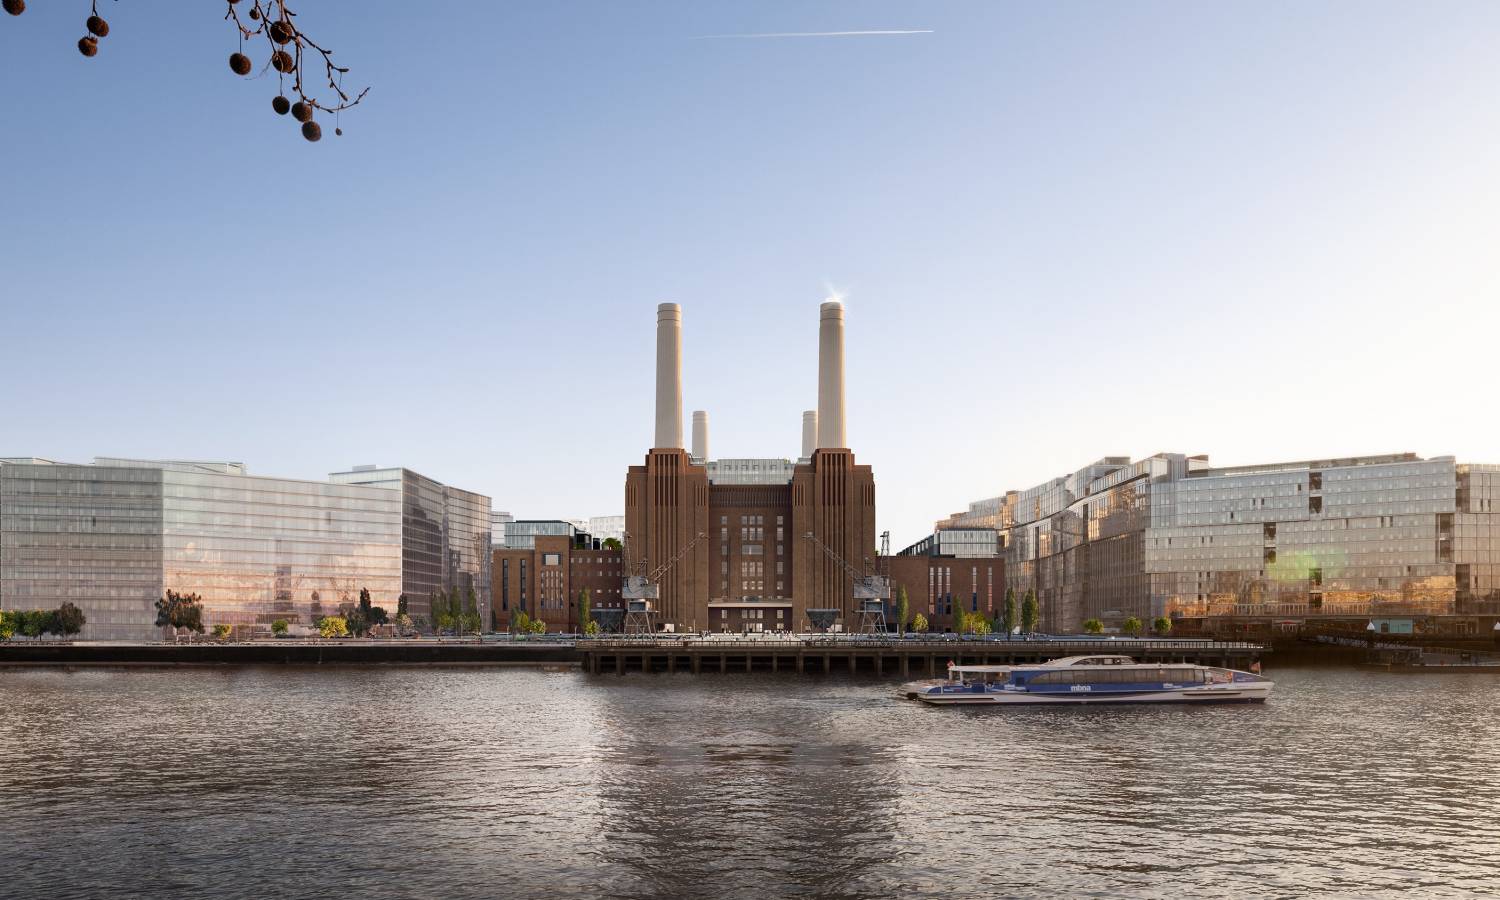 Battersea Power Station development welcomed its first residents late May